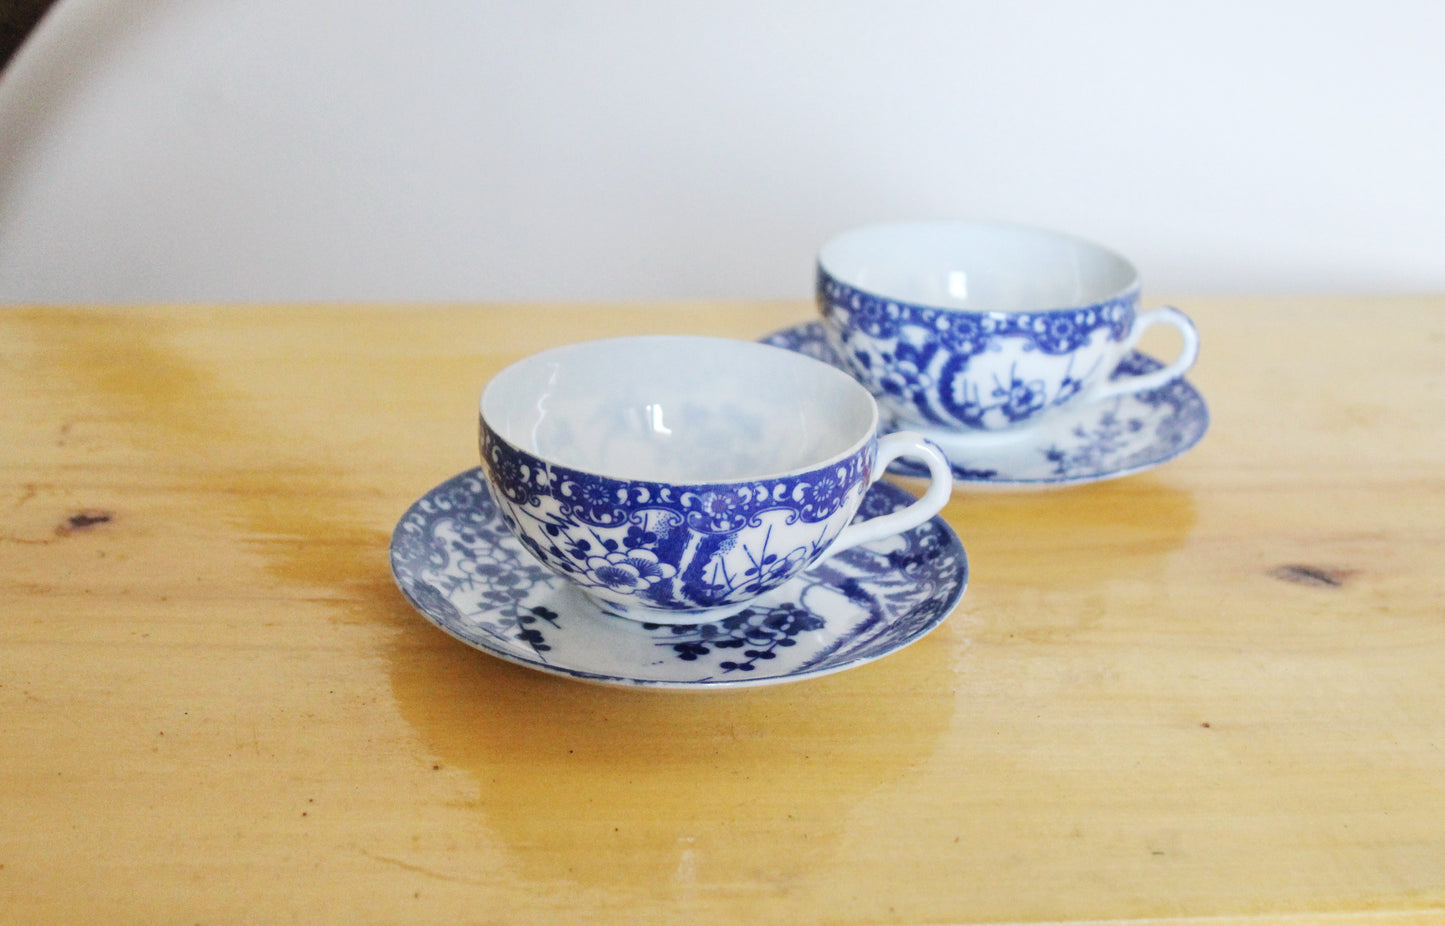 Set of two thin porcelain cups and saucers - vintage China ceramic rare tea pair - 1990s